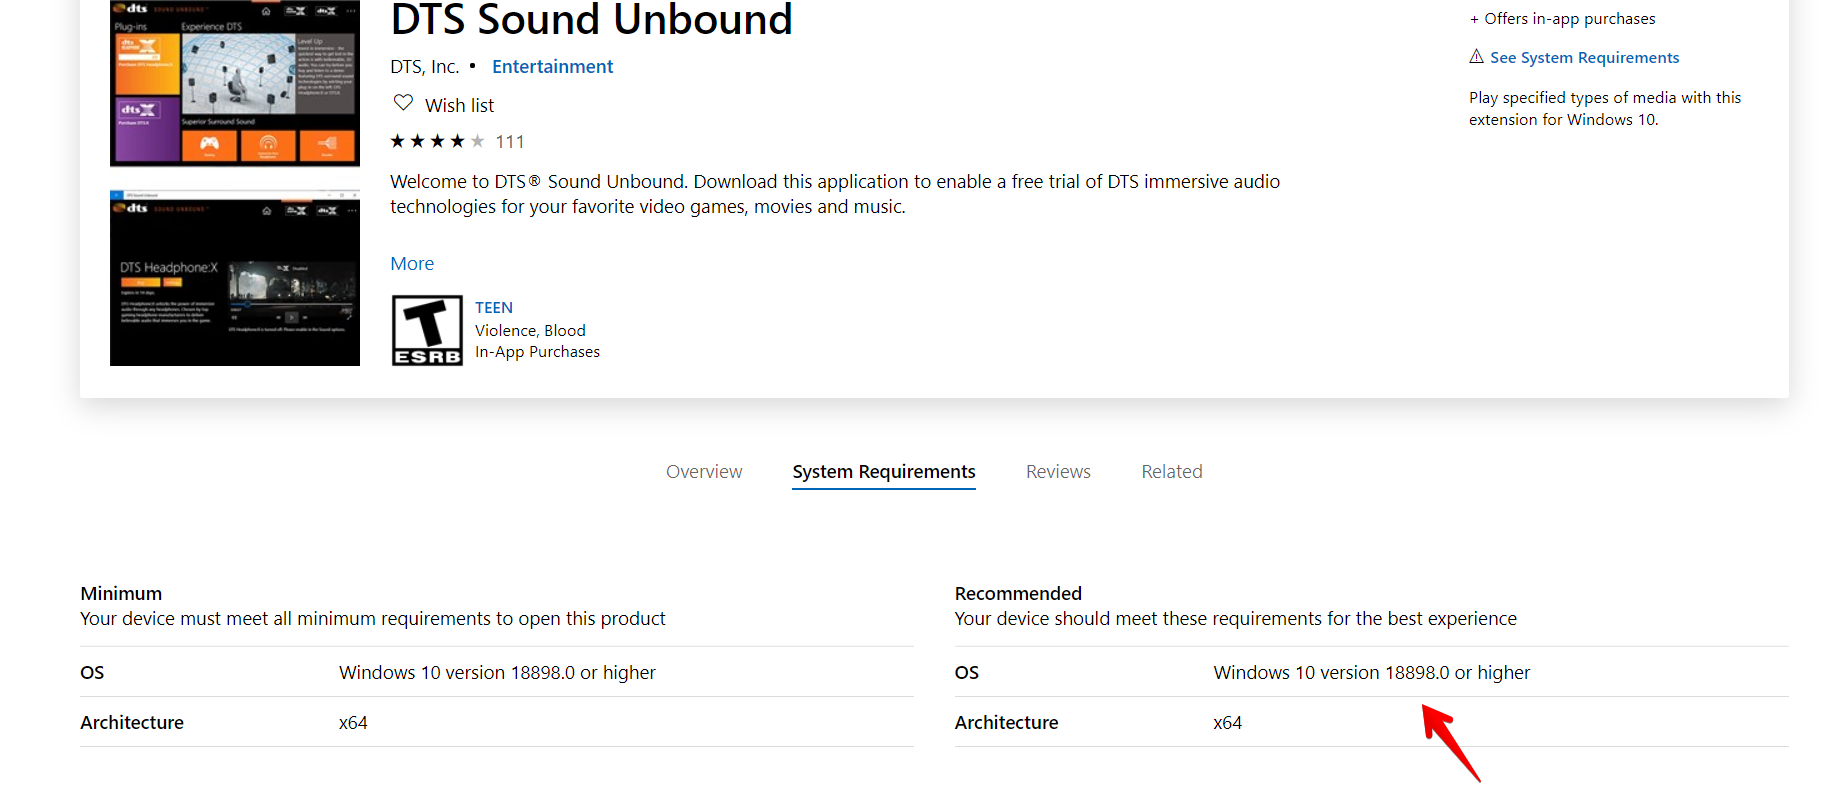 DTS Sound Unbound only gives option to buy or try free trial, even after  purchase